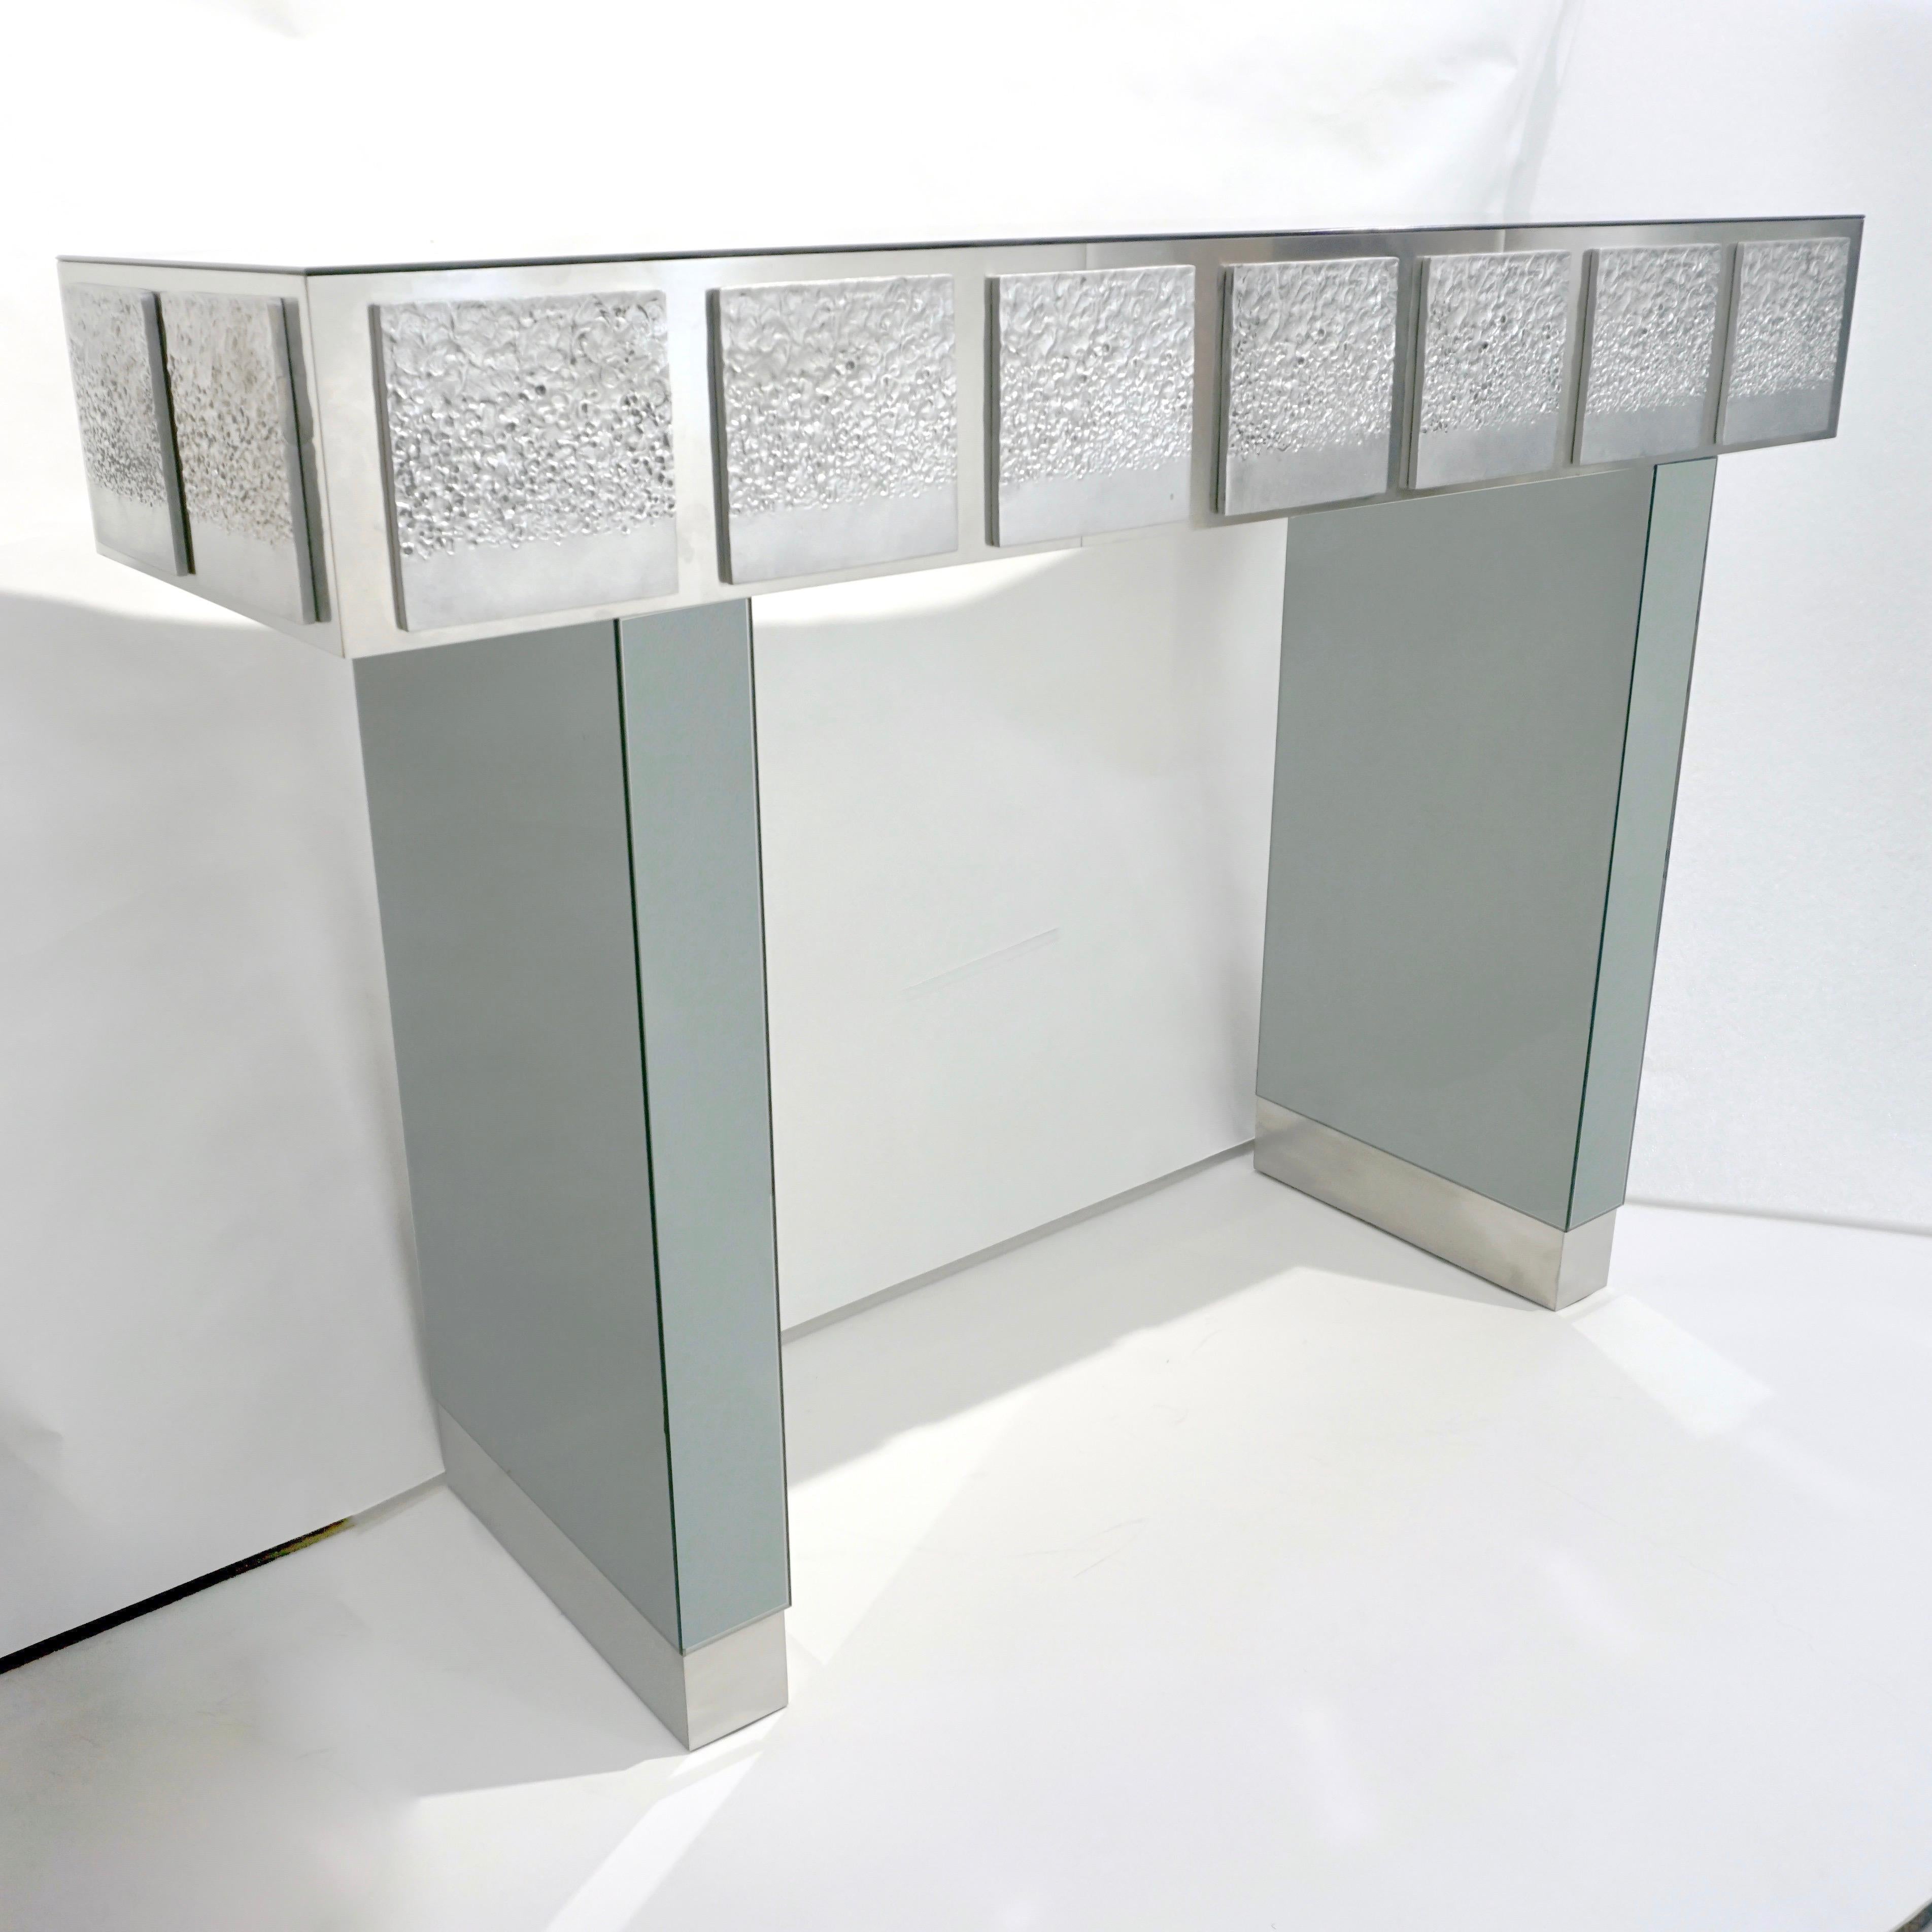 Bespoke Italian Contemporary One-of-a-Kind Polished Steel Smoked Mirror Console For Sale 2